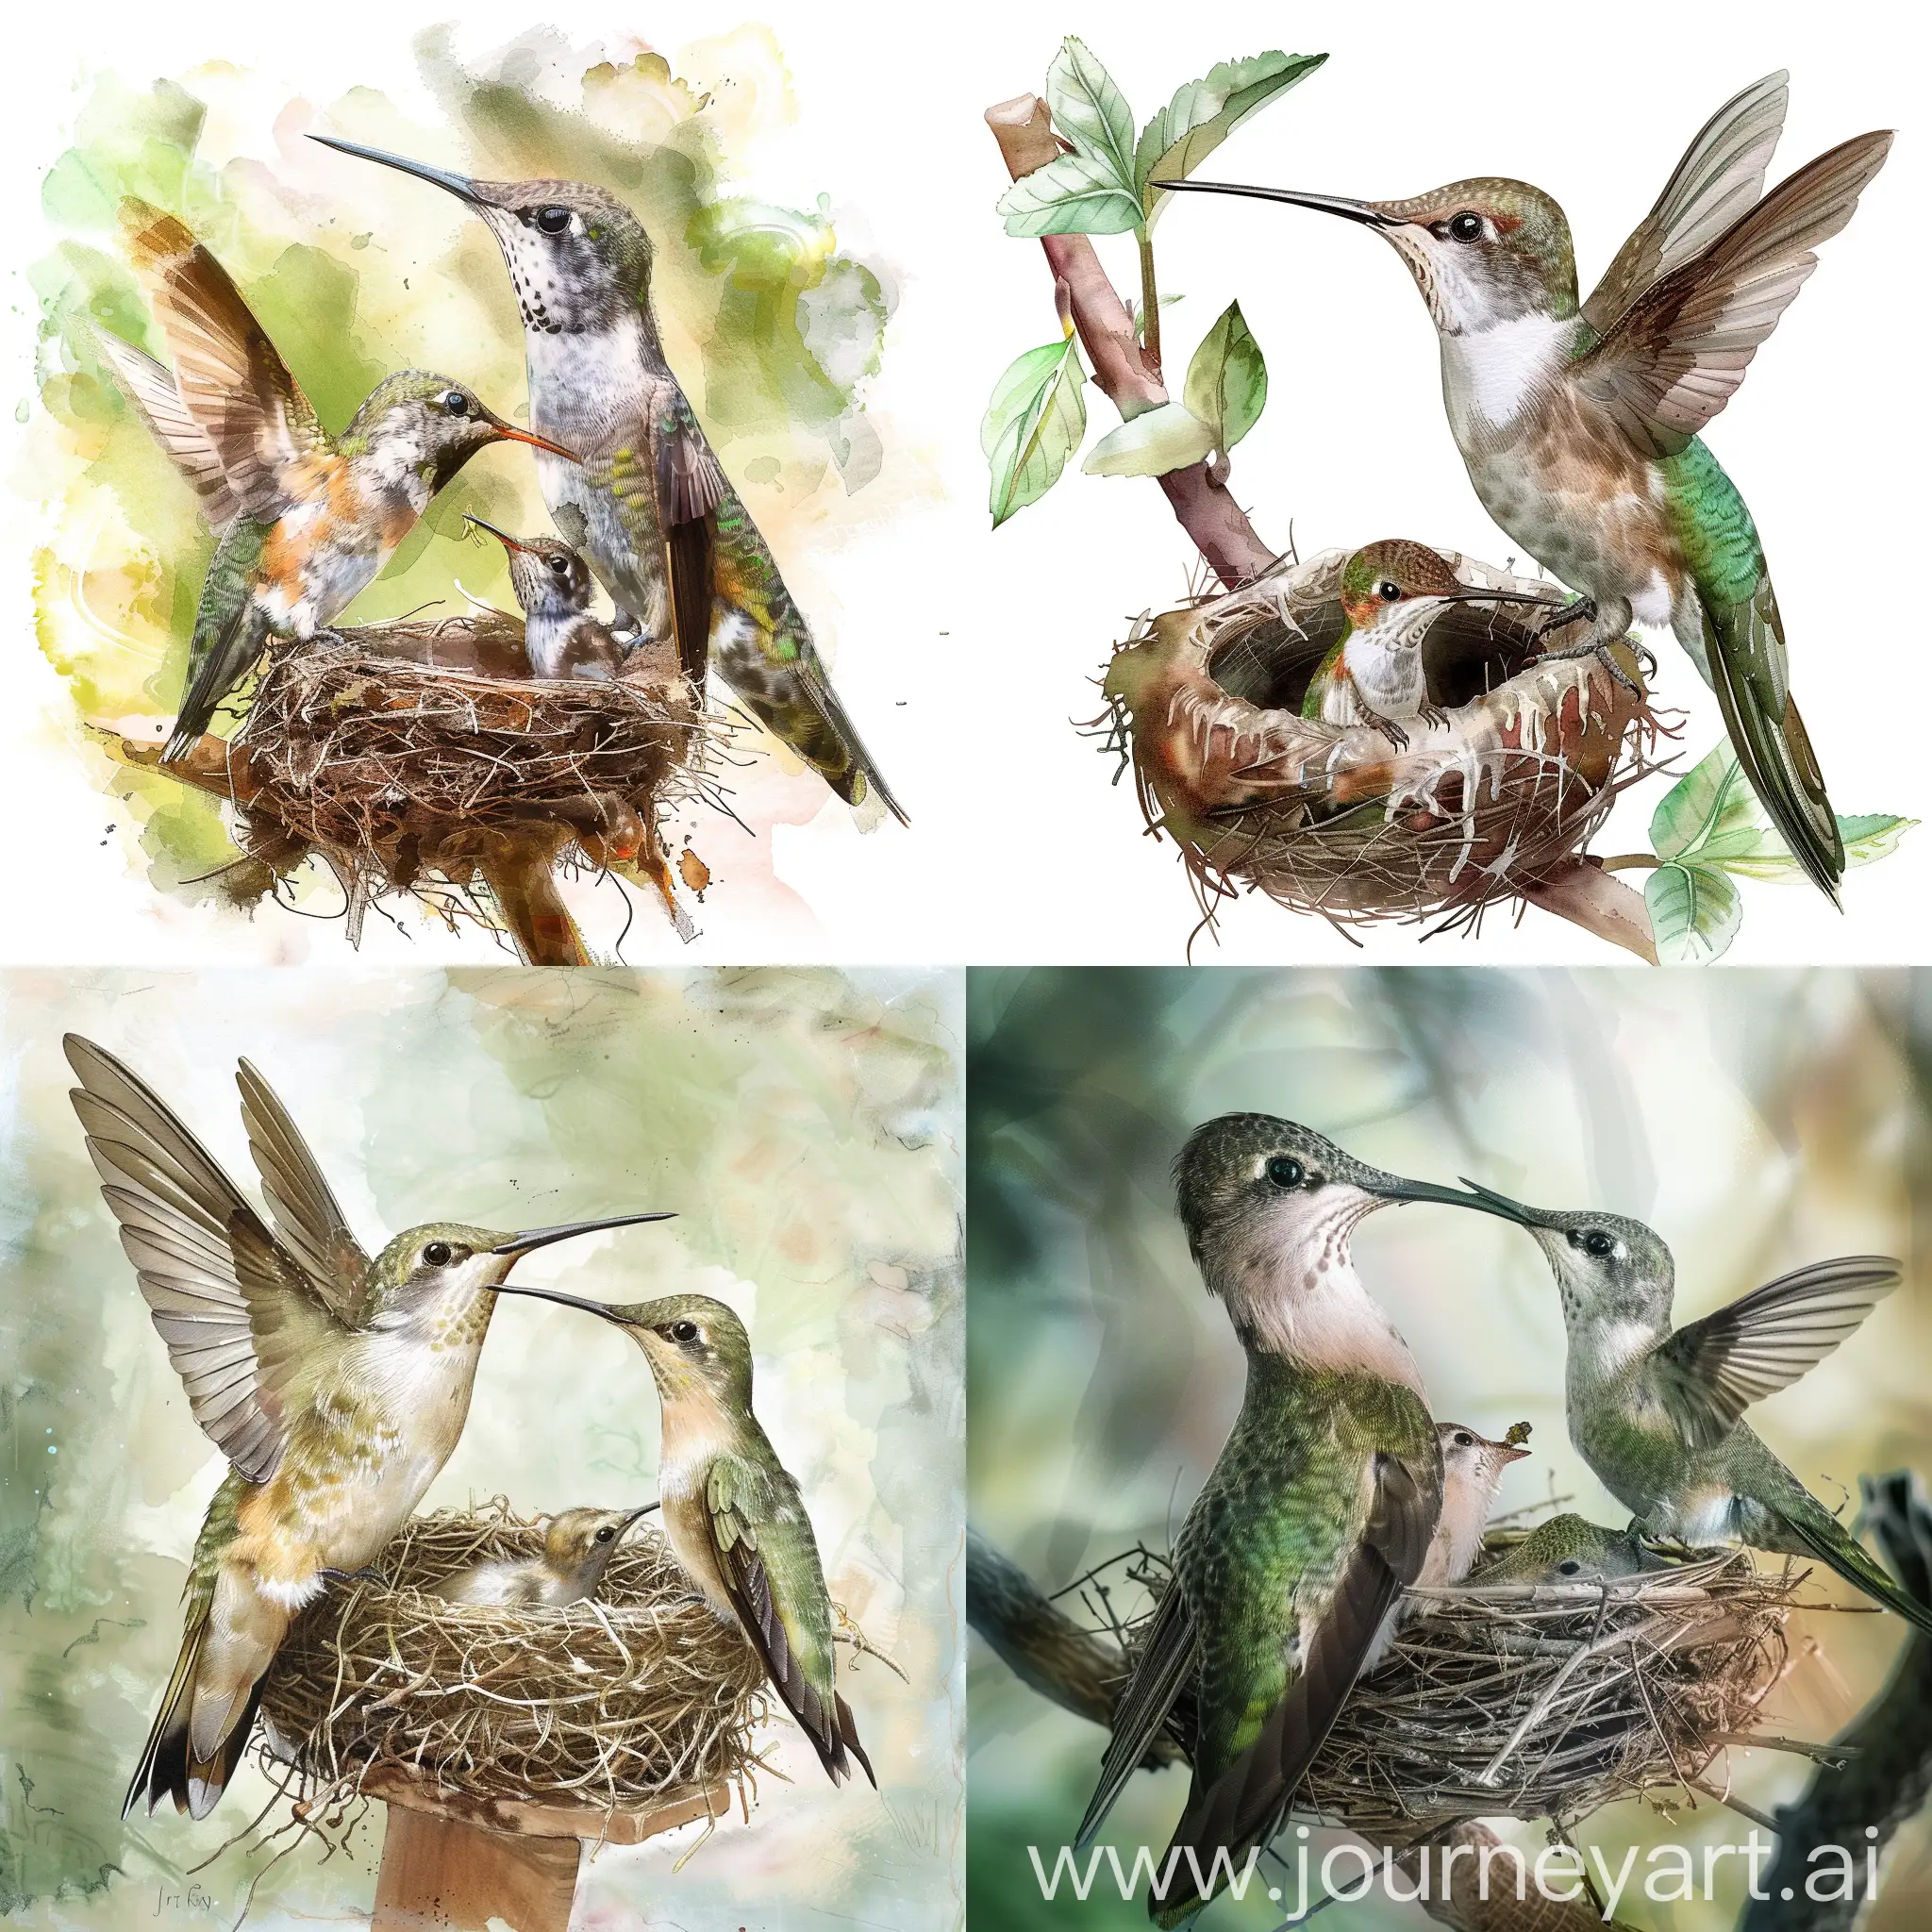 mother hummingbird feeding baby in nest, spring, nature, morning light, in watercolor style, high quality design